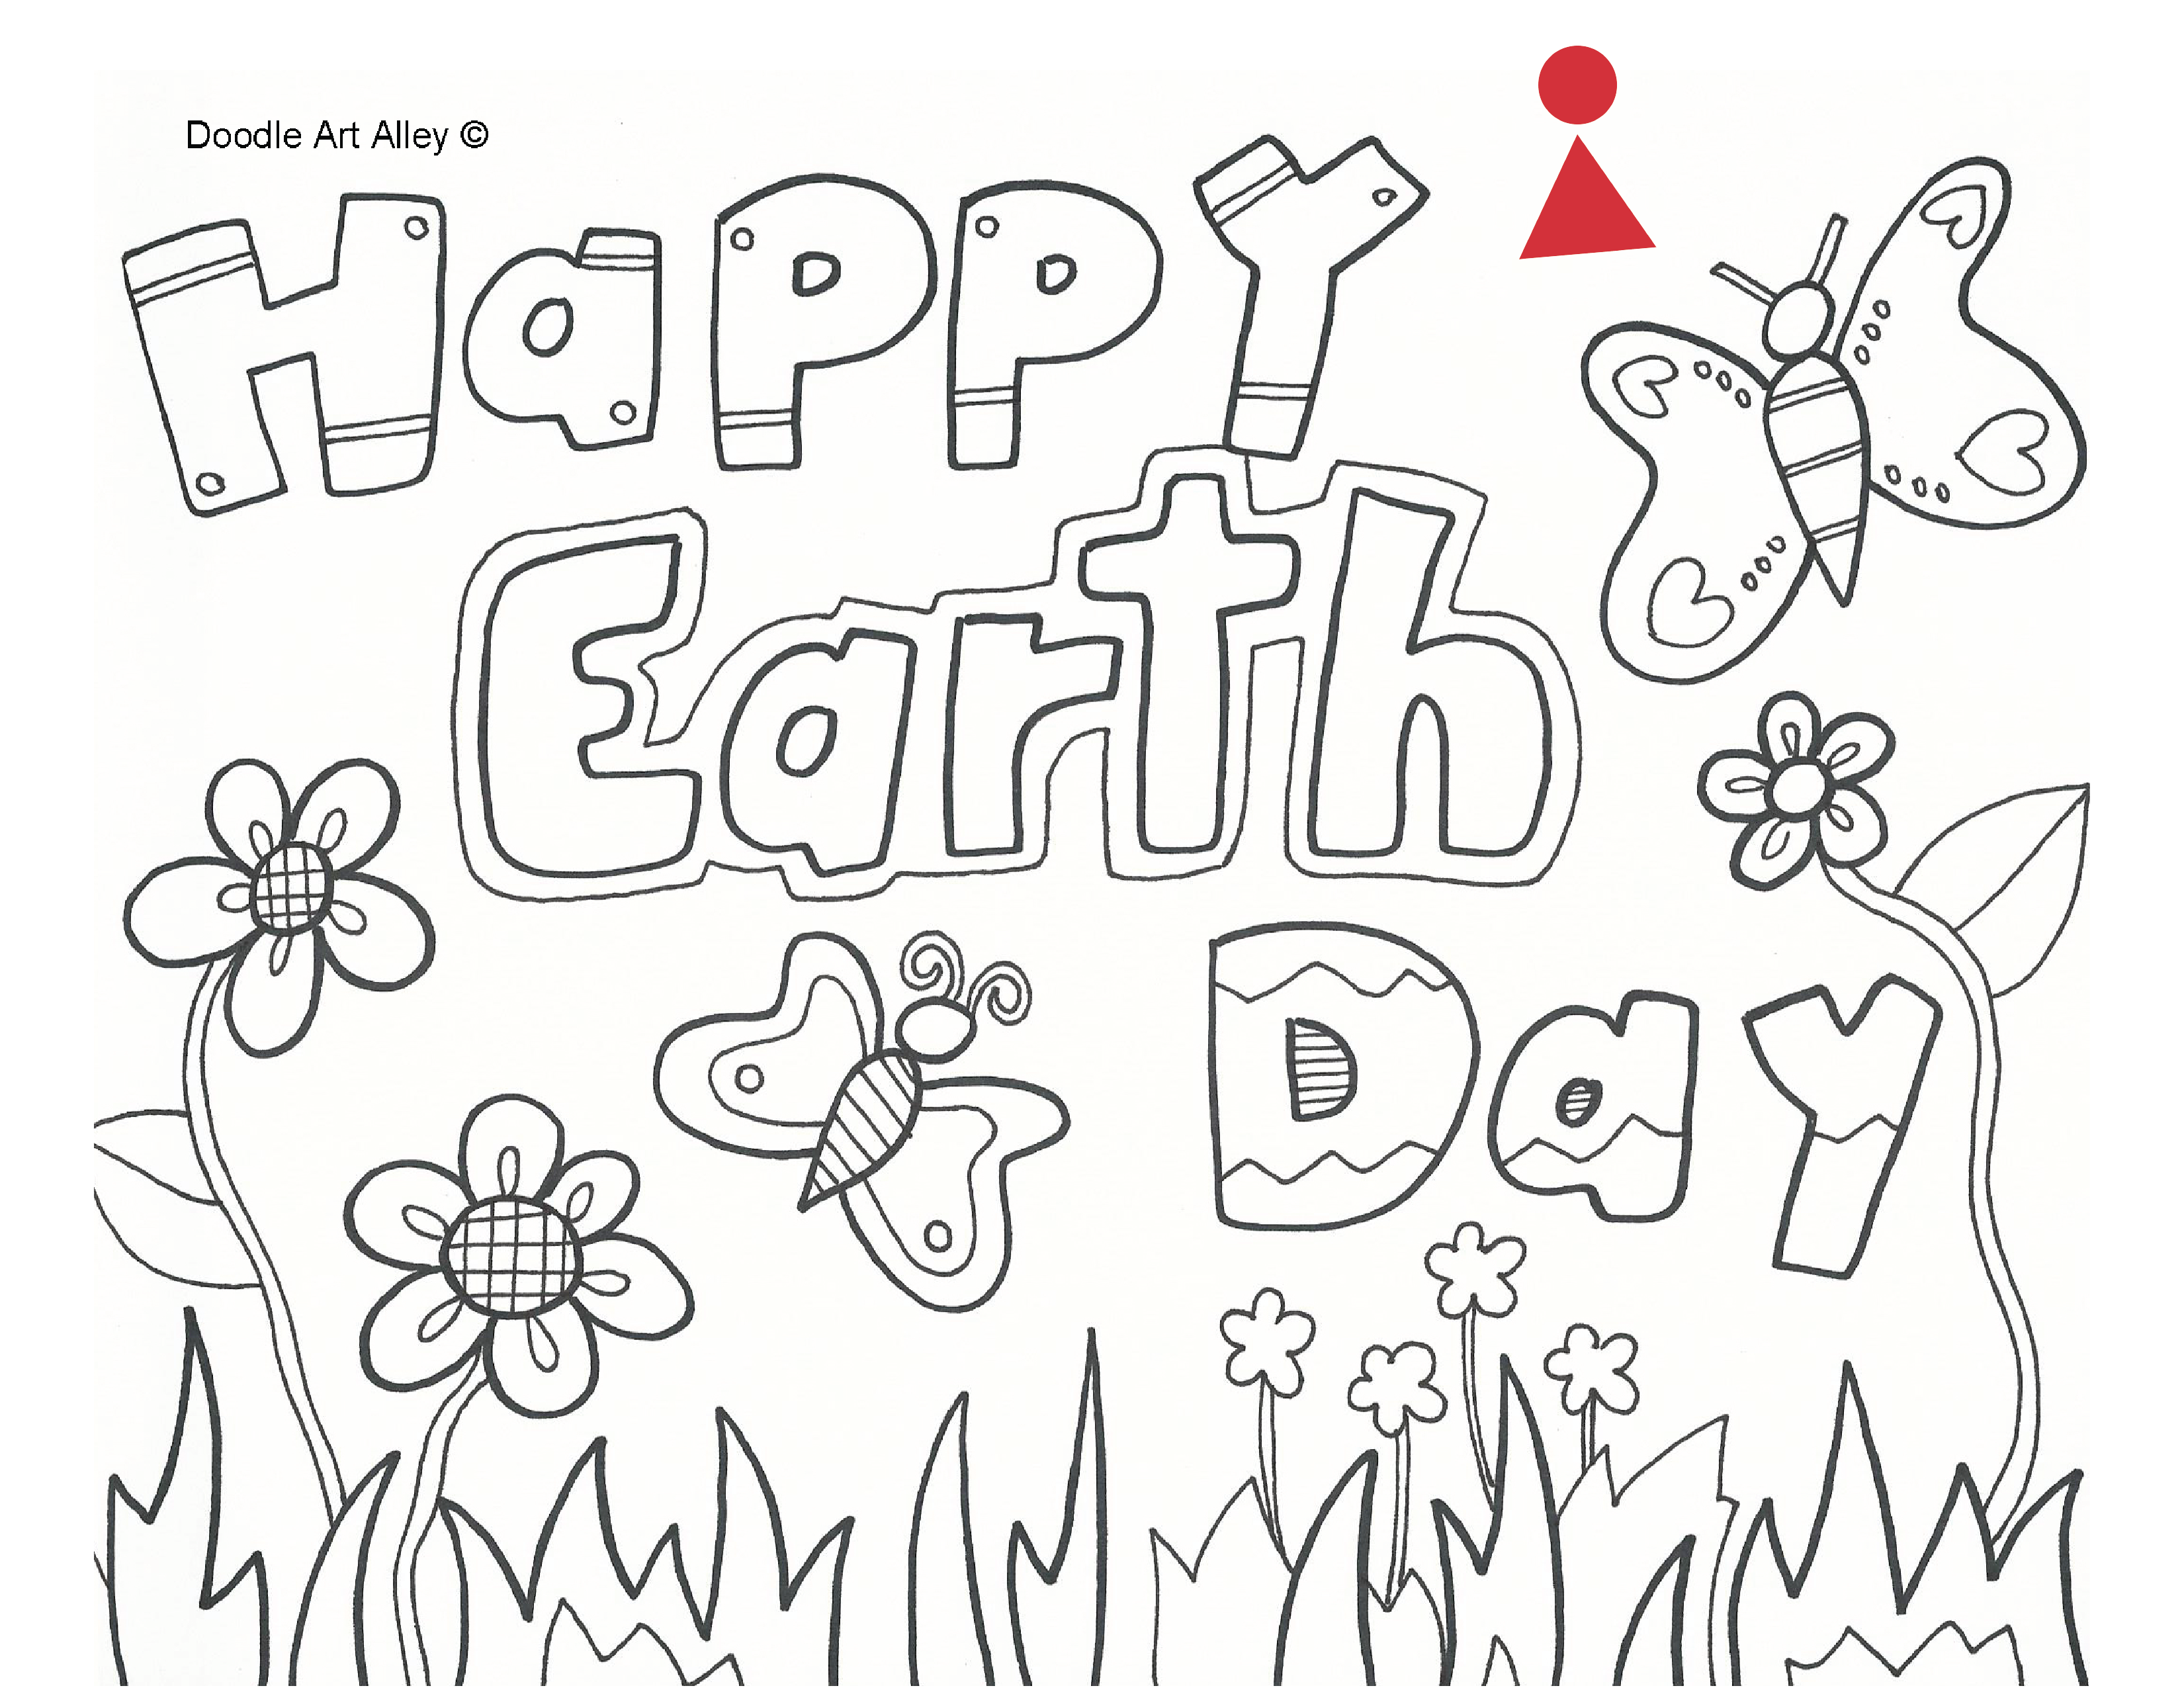 earth-day_colouring-09